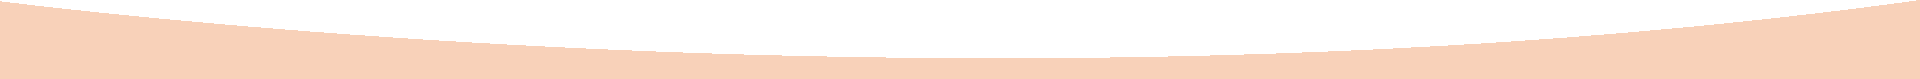 A green and pink background with a peach border.